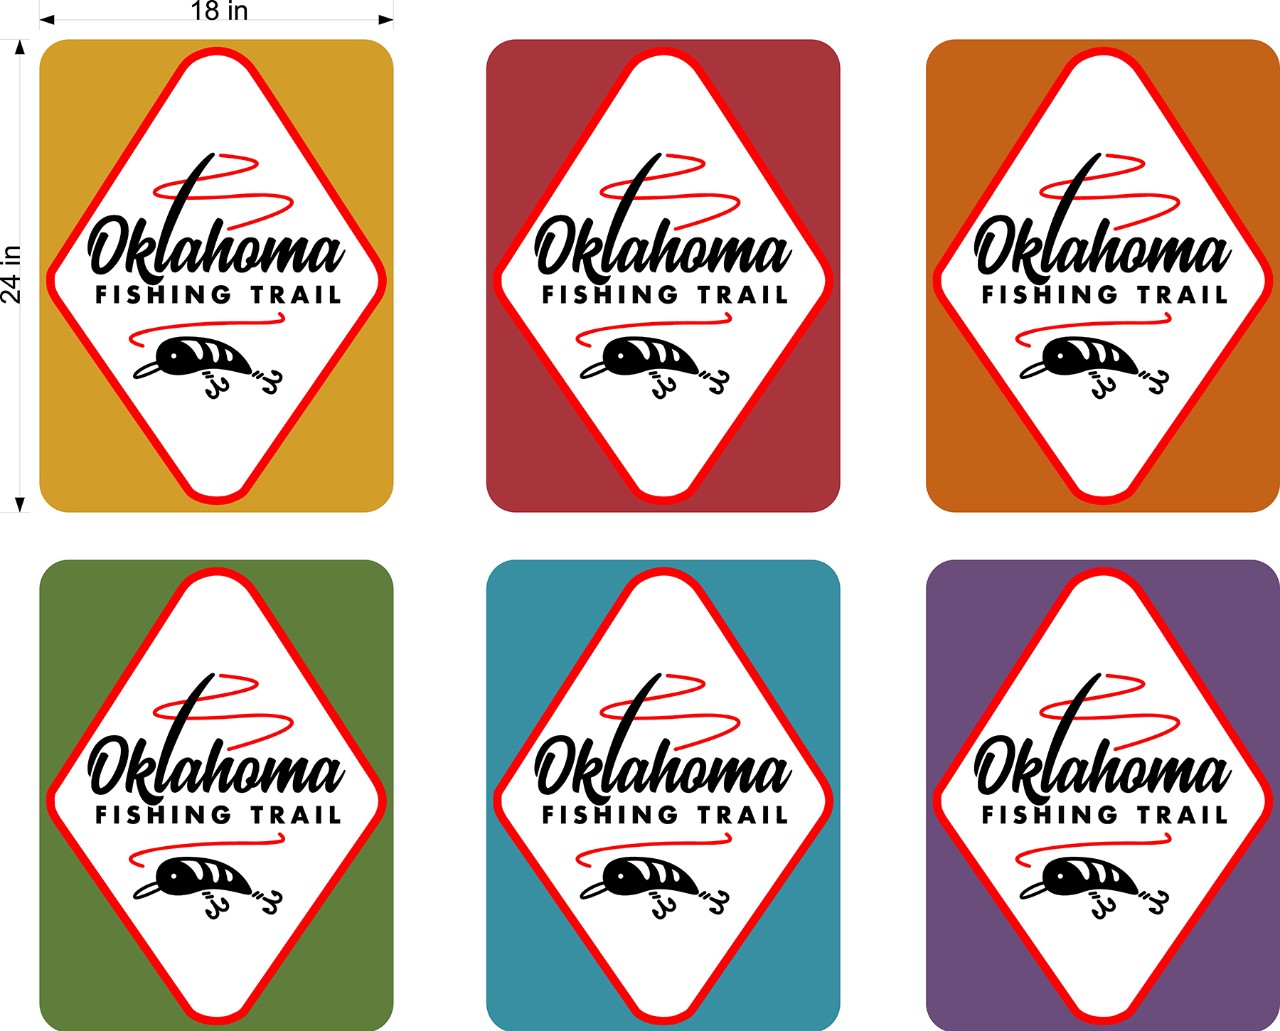 A partnership between the Oklahoma Tourism & Recreation Department and the Oklahoma Department of Transportation, roadside signs are being erected indicating the location of the Oklahoma Fishing Trail loops. Designed by OTRD to promote the state’s unique fishing opportunities and increase revenue, the trail highlights lakes and rivers around the state. 